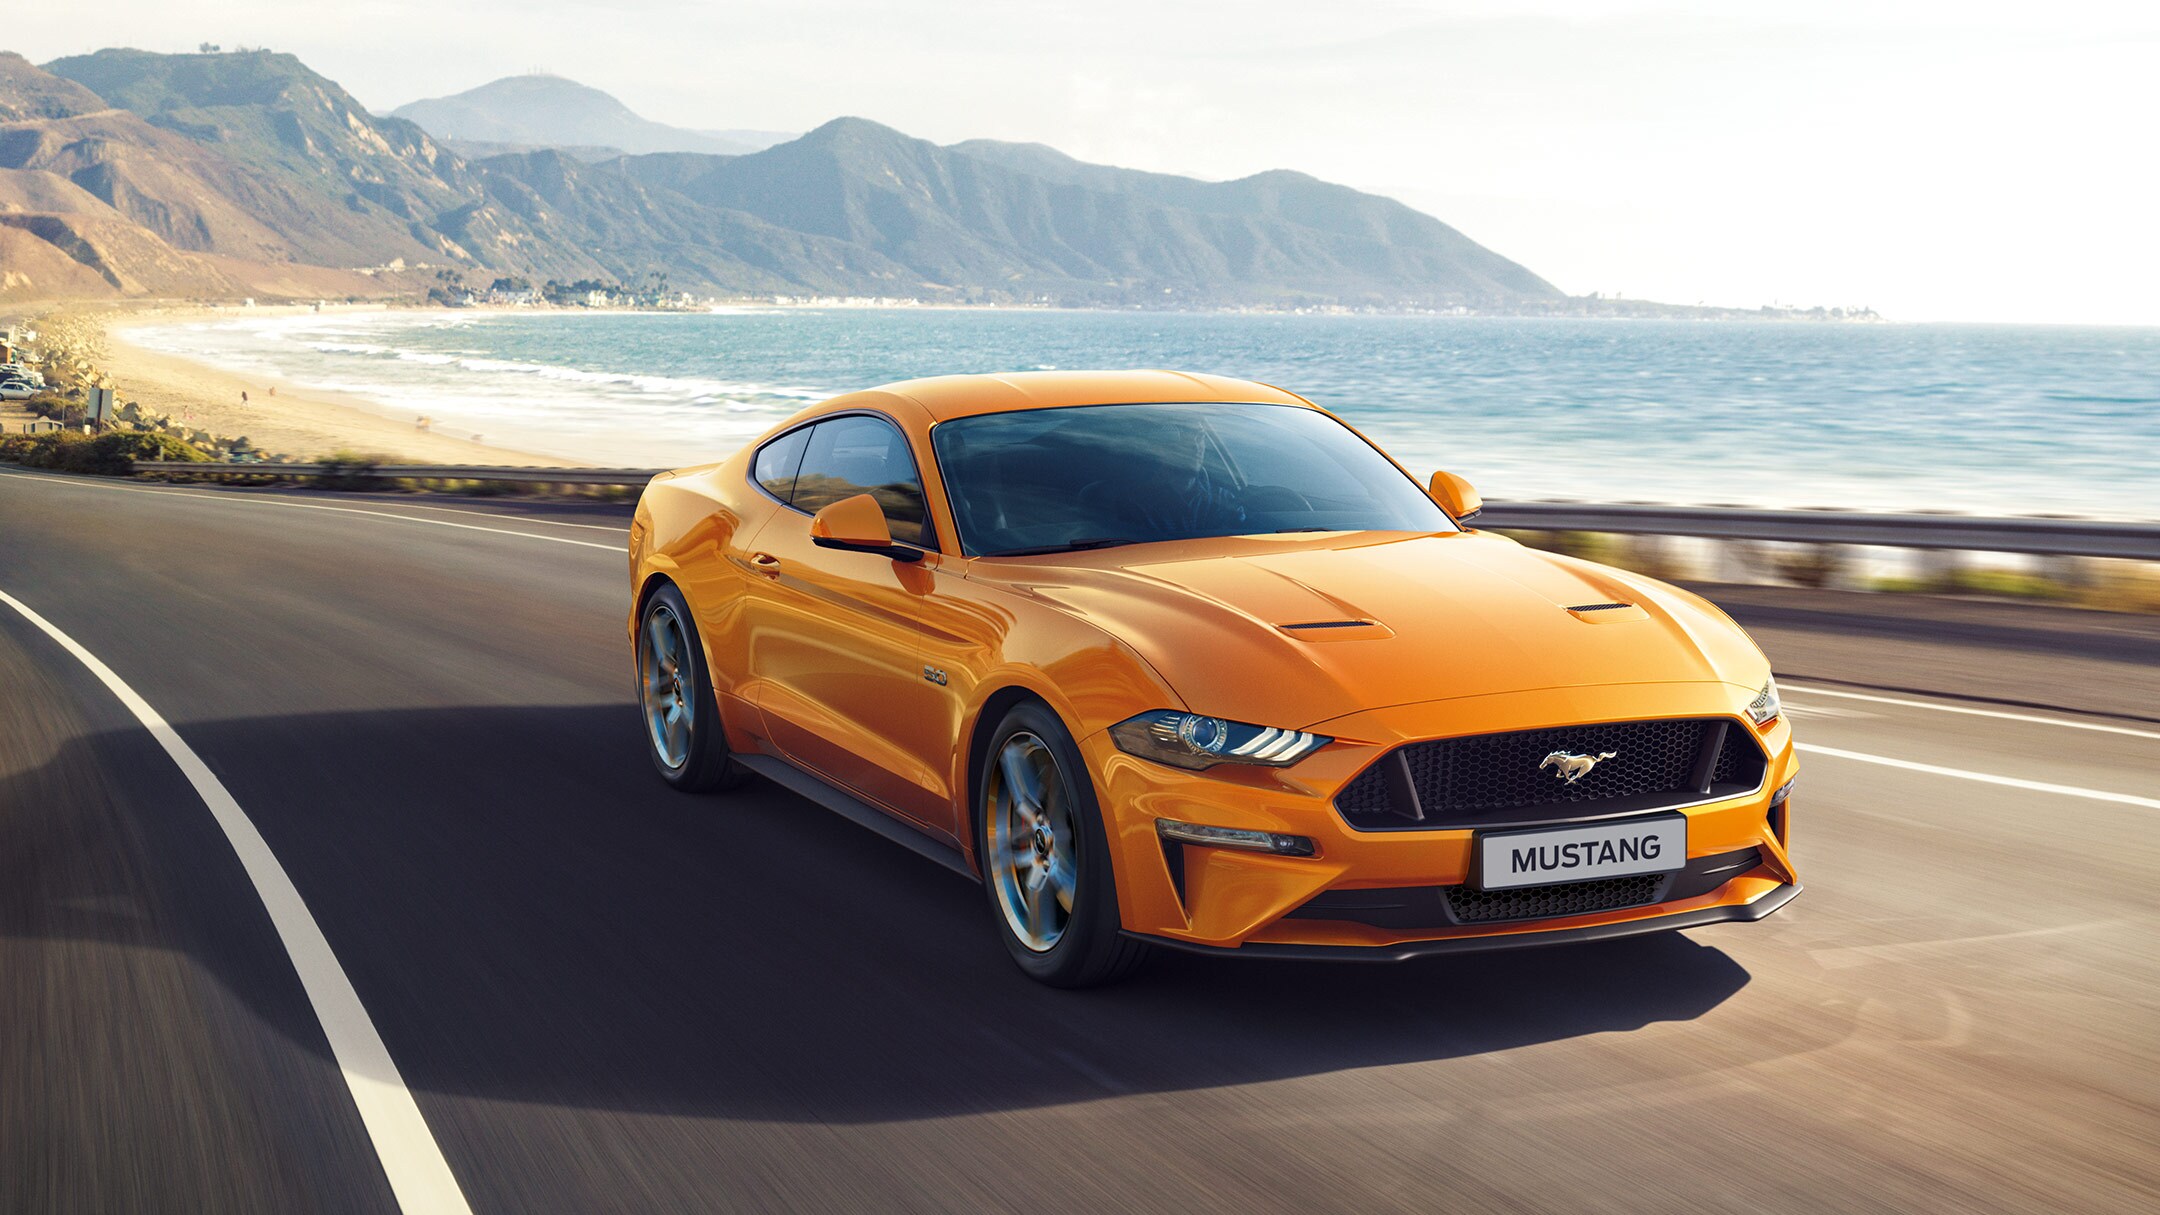 Yellow Ford Mustang on road by sea